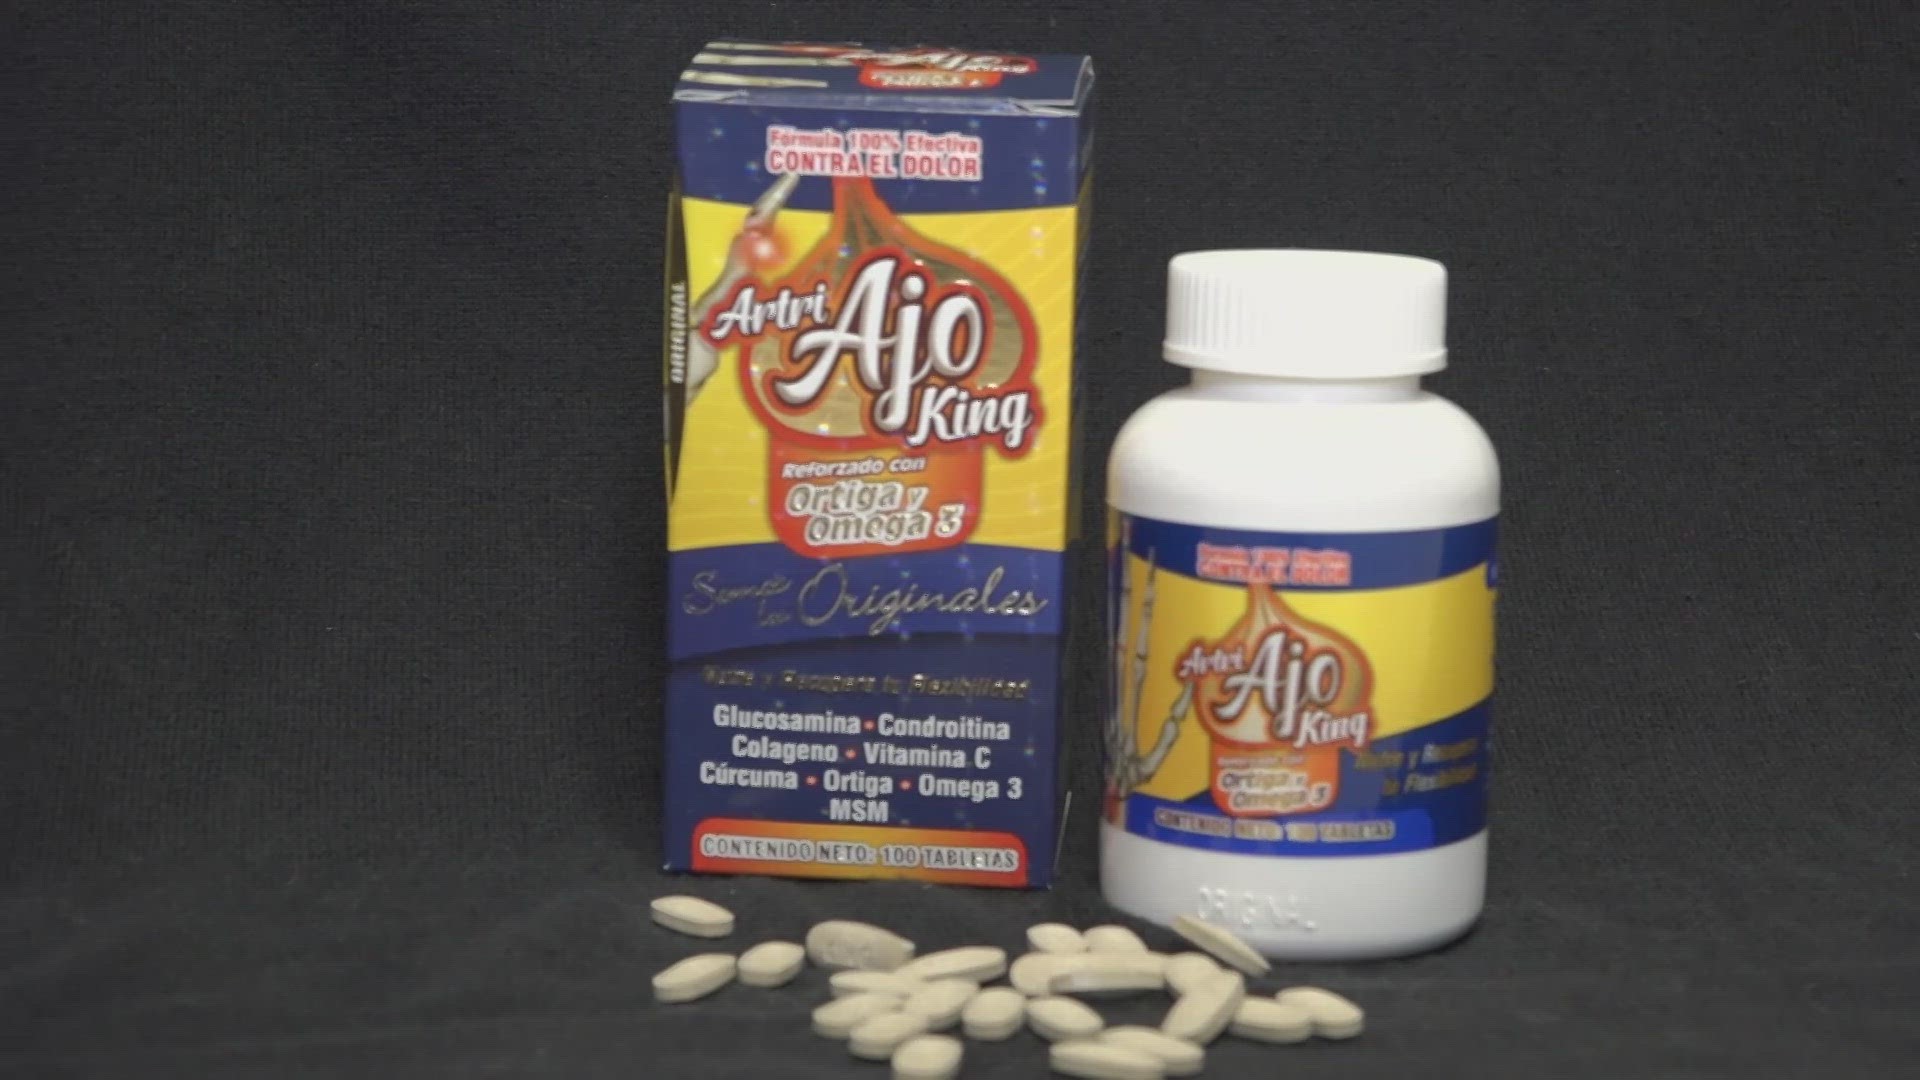 The FDA is warning about a popular supplemental product, promoted for pain relief, but that the agency says actually contains hidden drug ingredients.